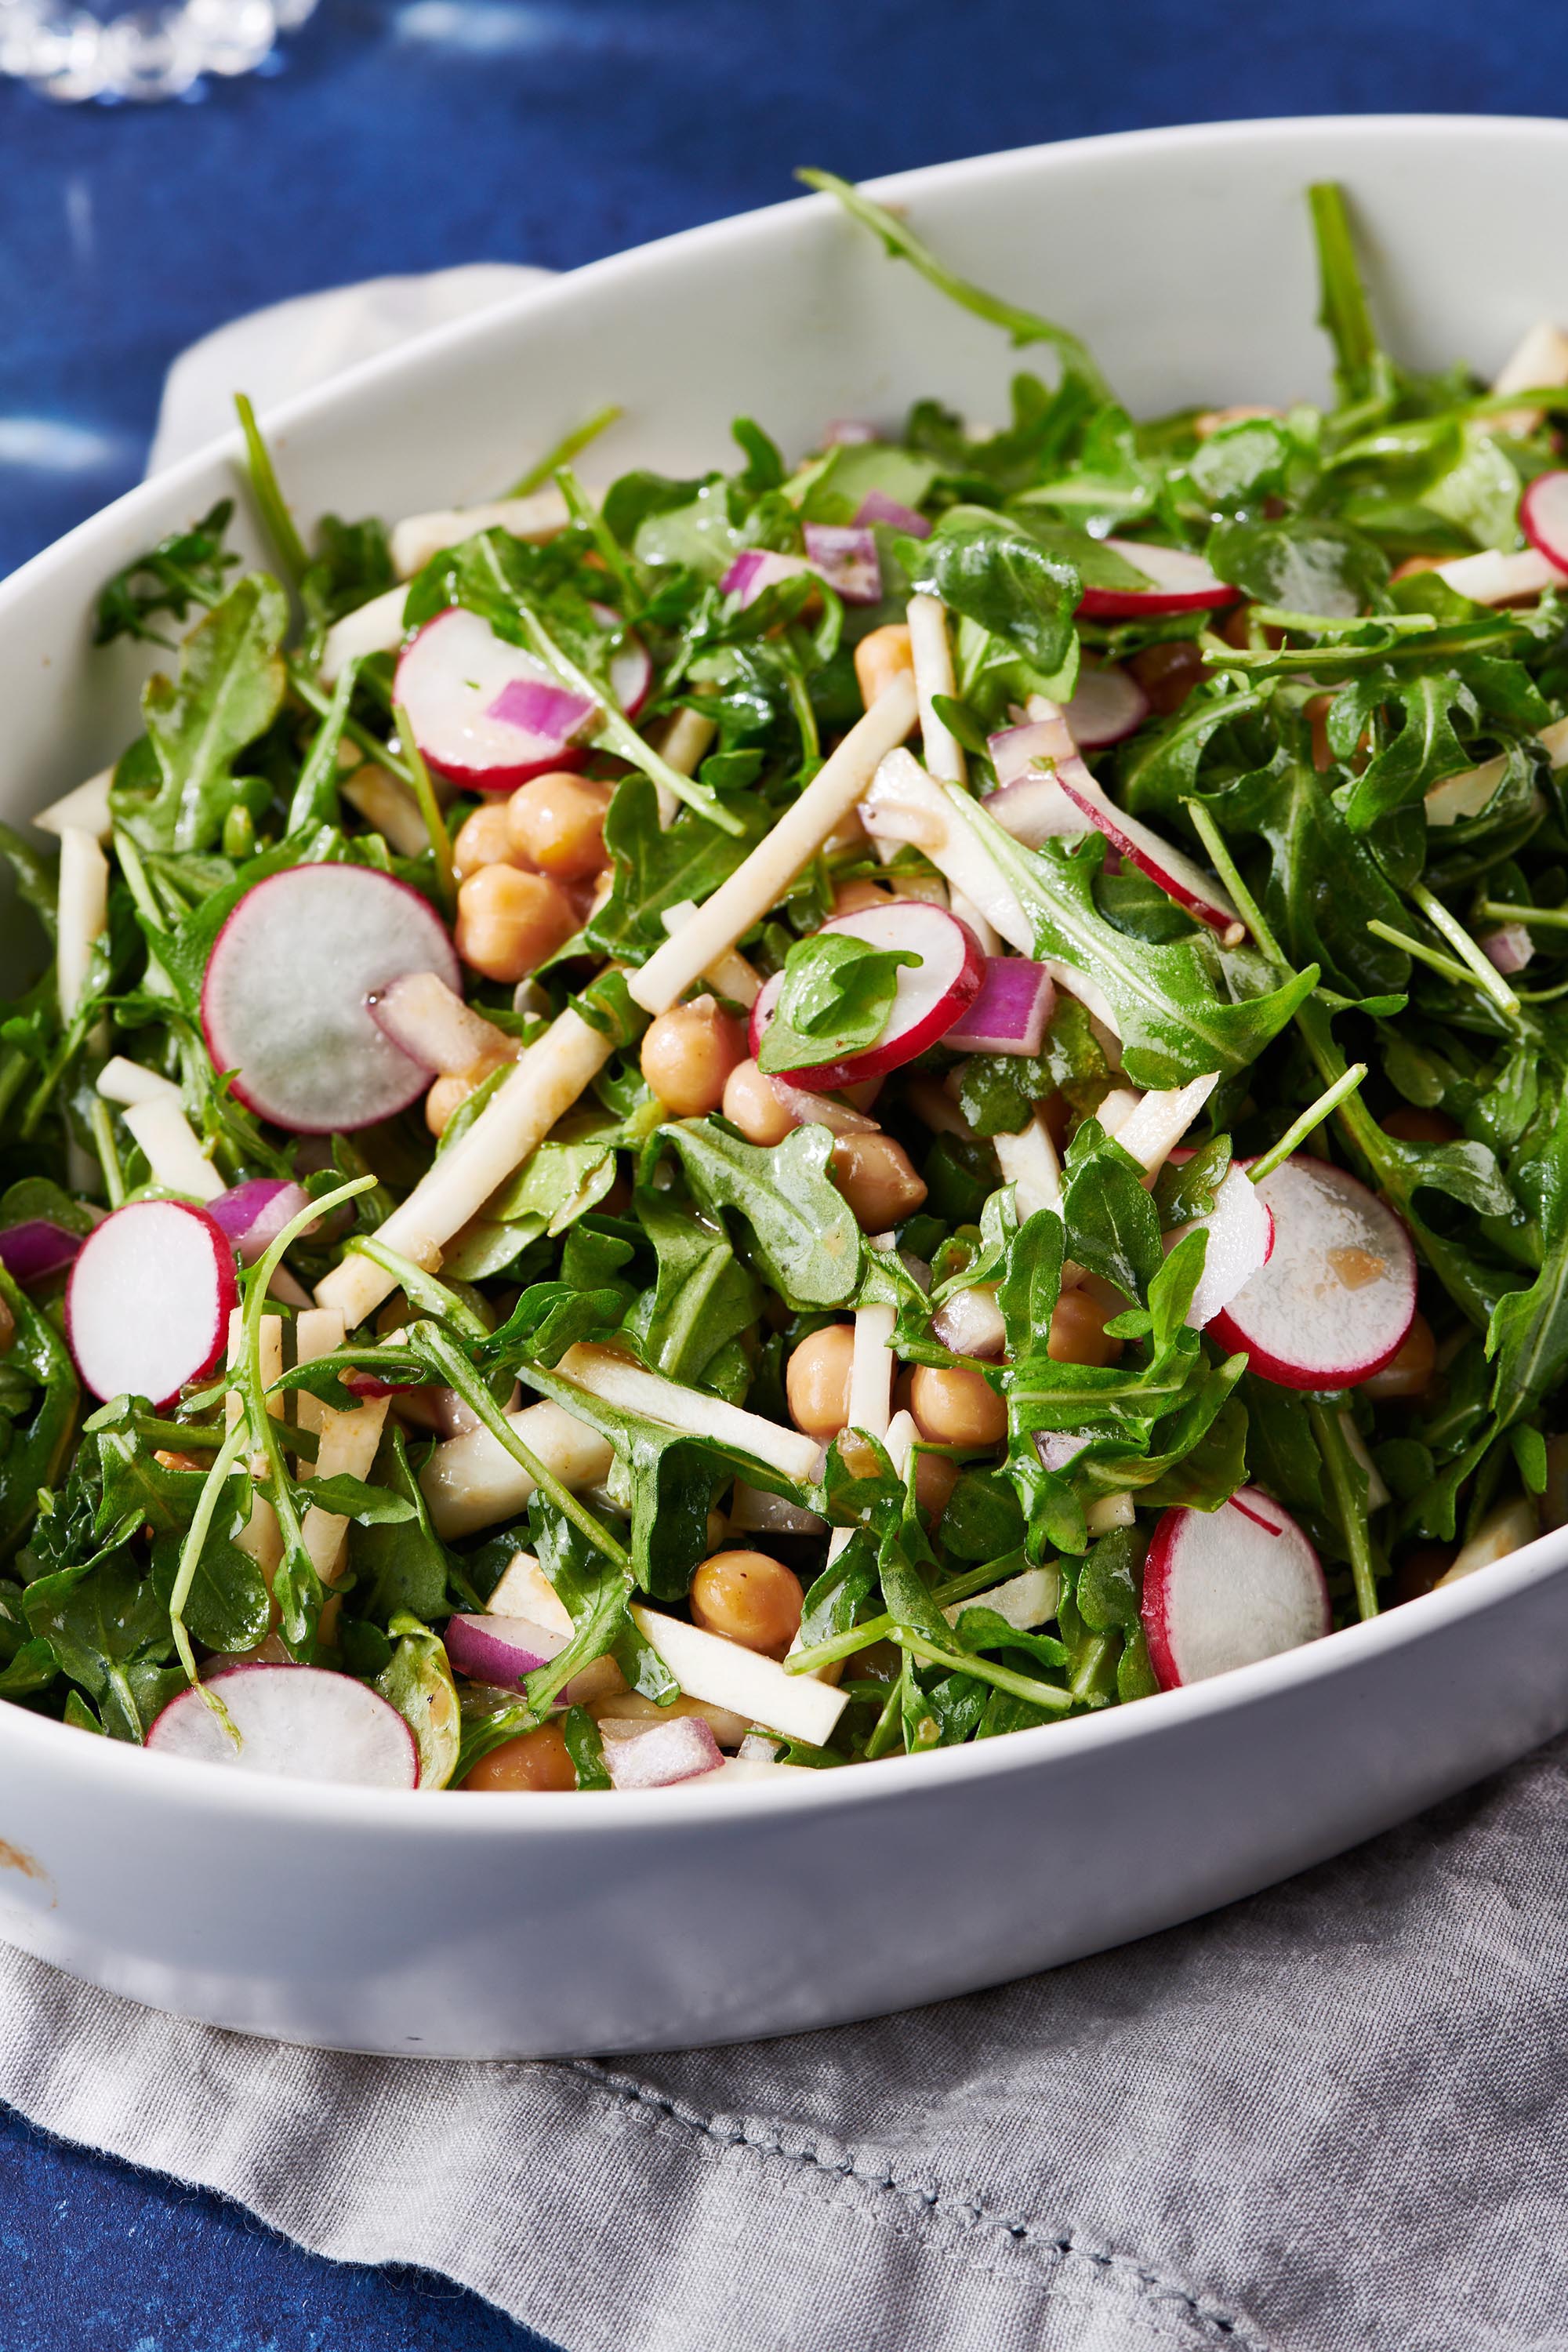 Winter Salad with radishes, chickpeas, and red onion.